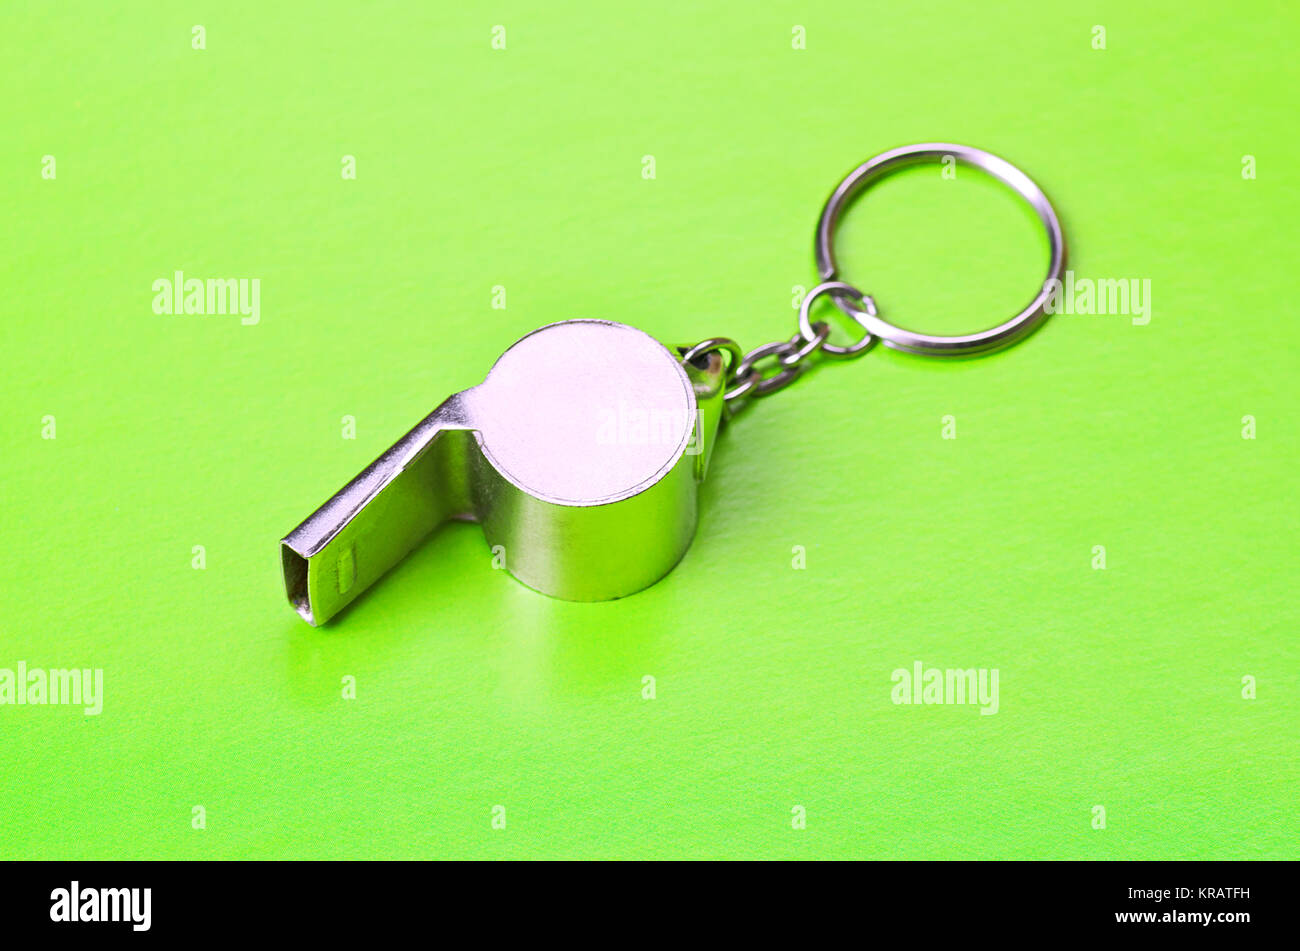 Sports or coaches metal whistle, closeup. Concept refereeing sport on green card background. Soccer or football referee whistle and caution cards Stock Photo